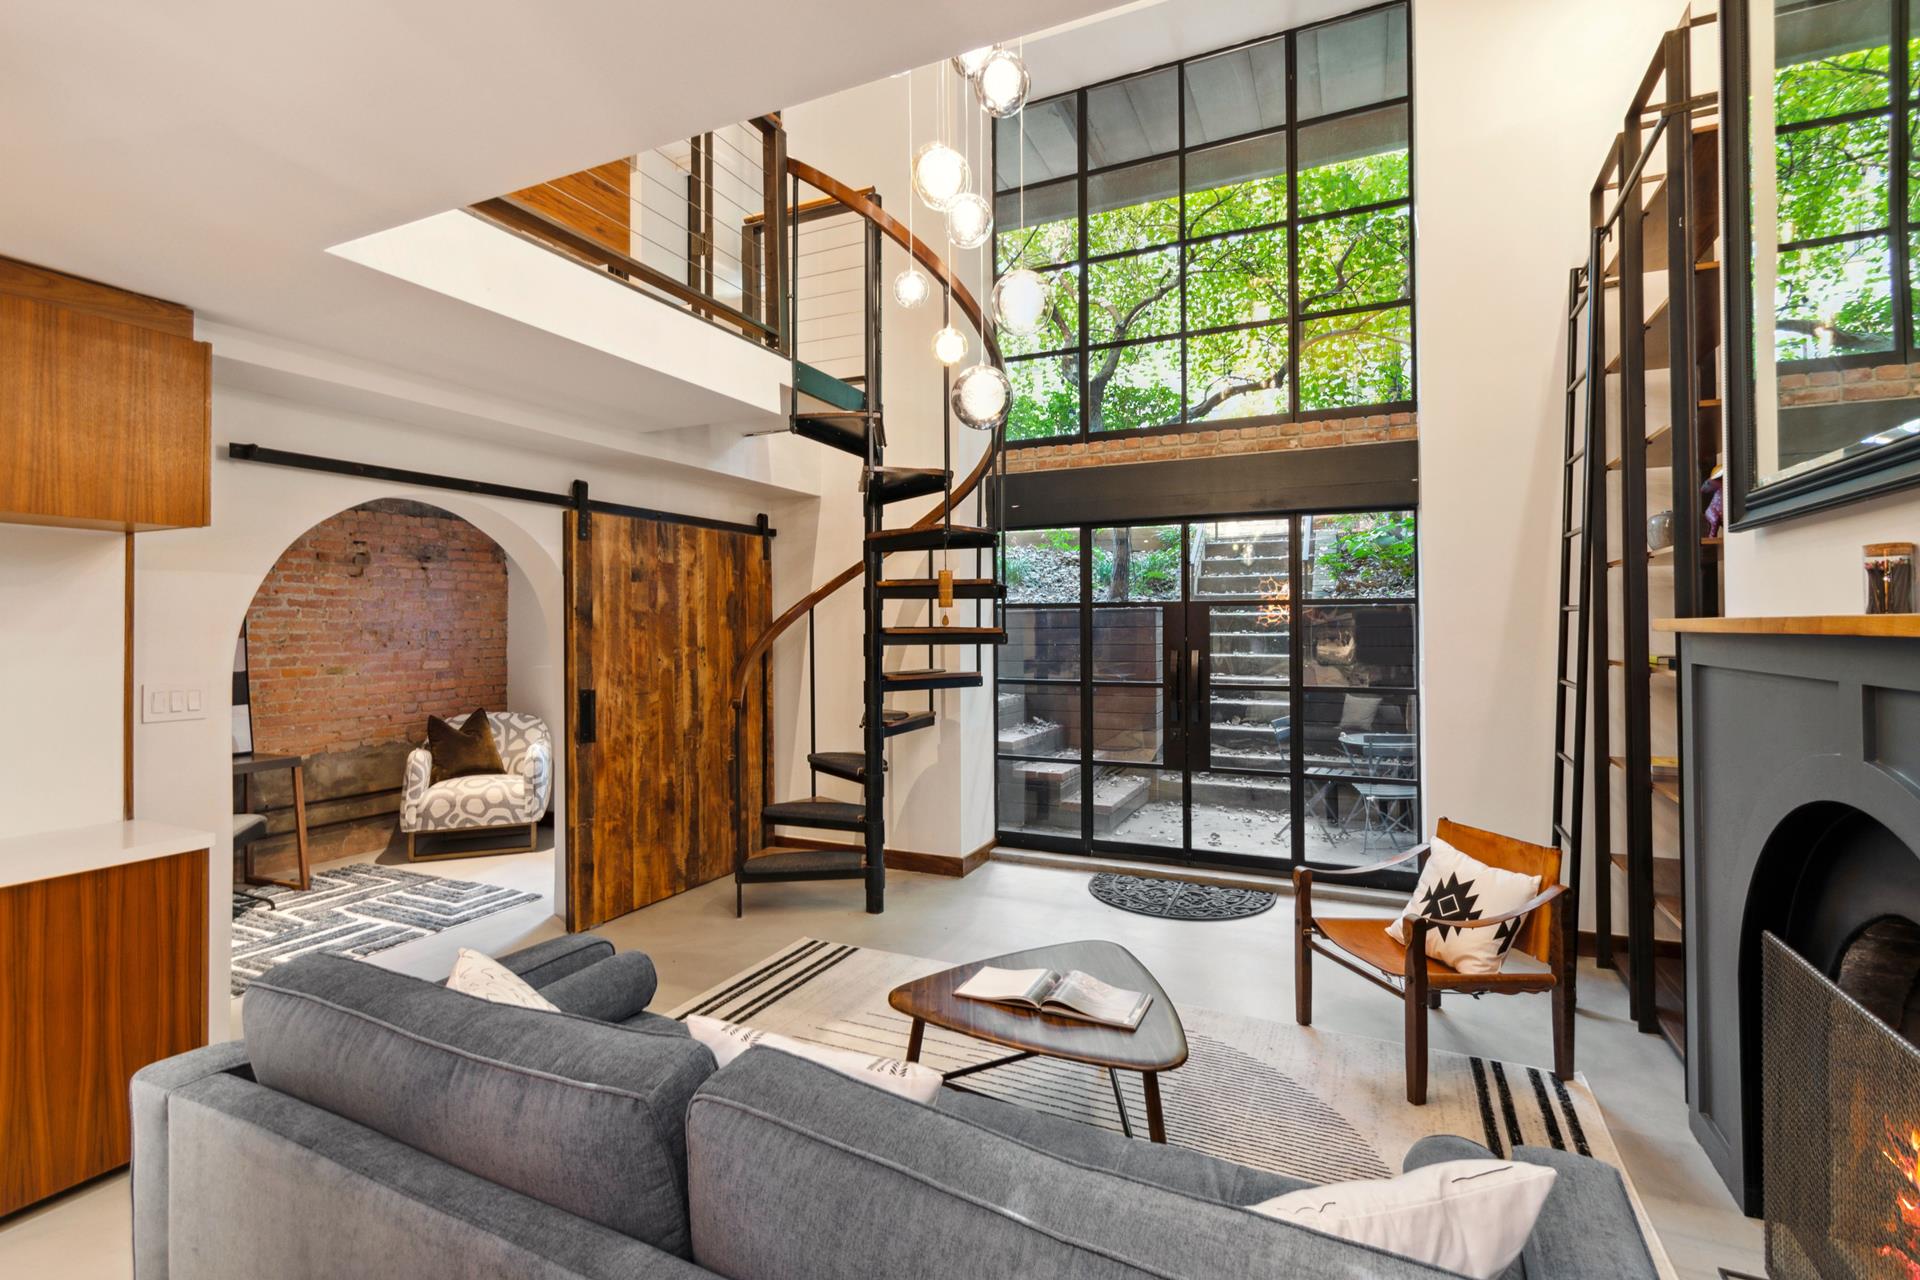 442 West 23rd Street A, Chelsea, Downtown, NYC - 3 Bedrooms  
2.5 Bathrooms  
5 Rooms - 